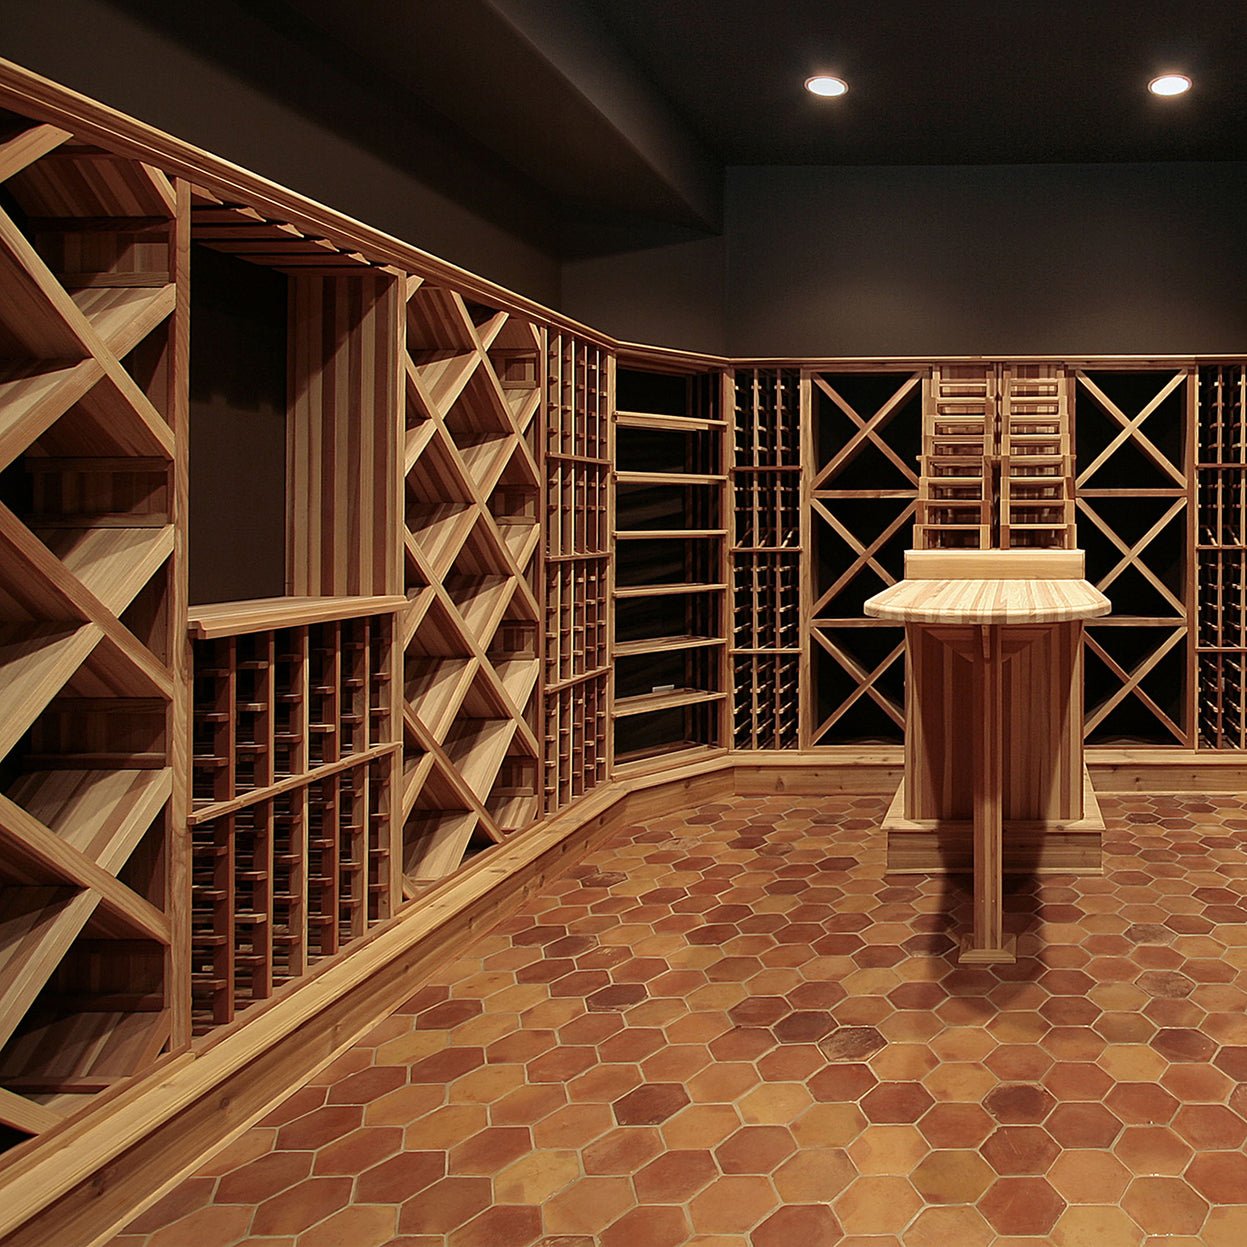 CRAFTING YOUR DREAM: DESIGNING THE PERFECT WINE STORAGE AREA